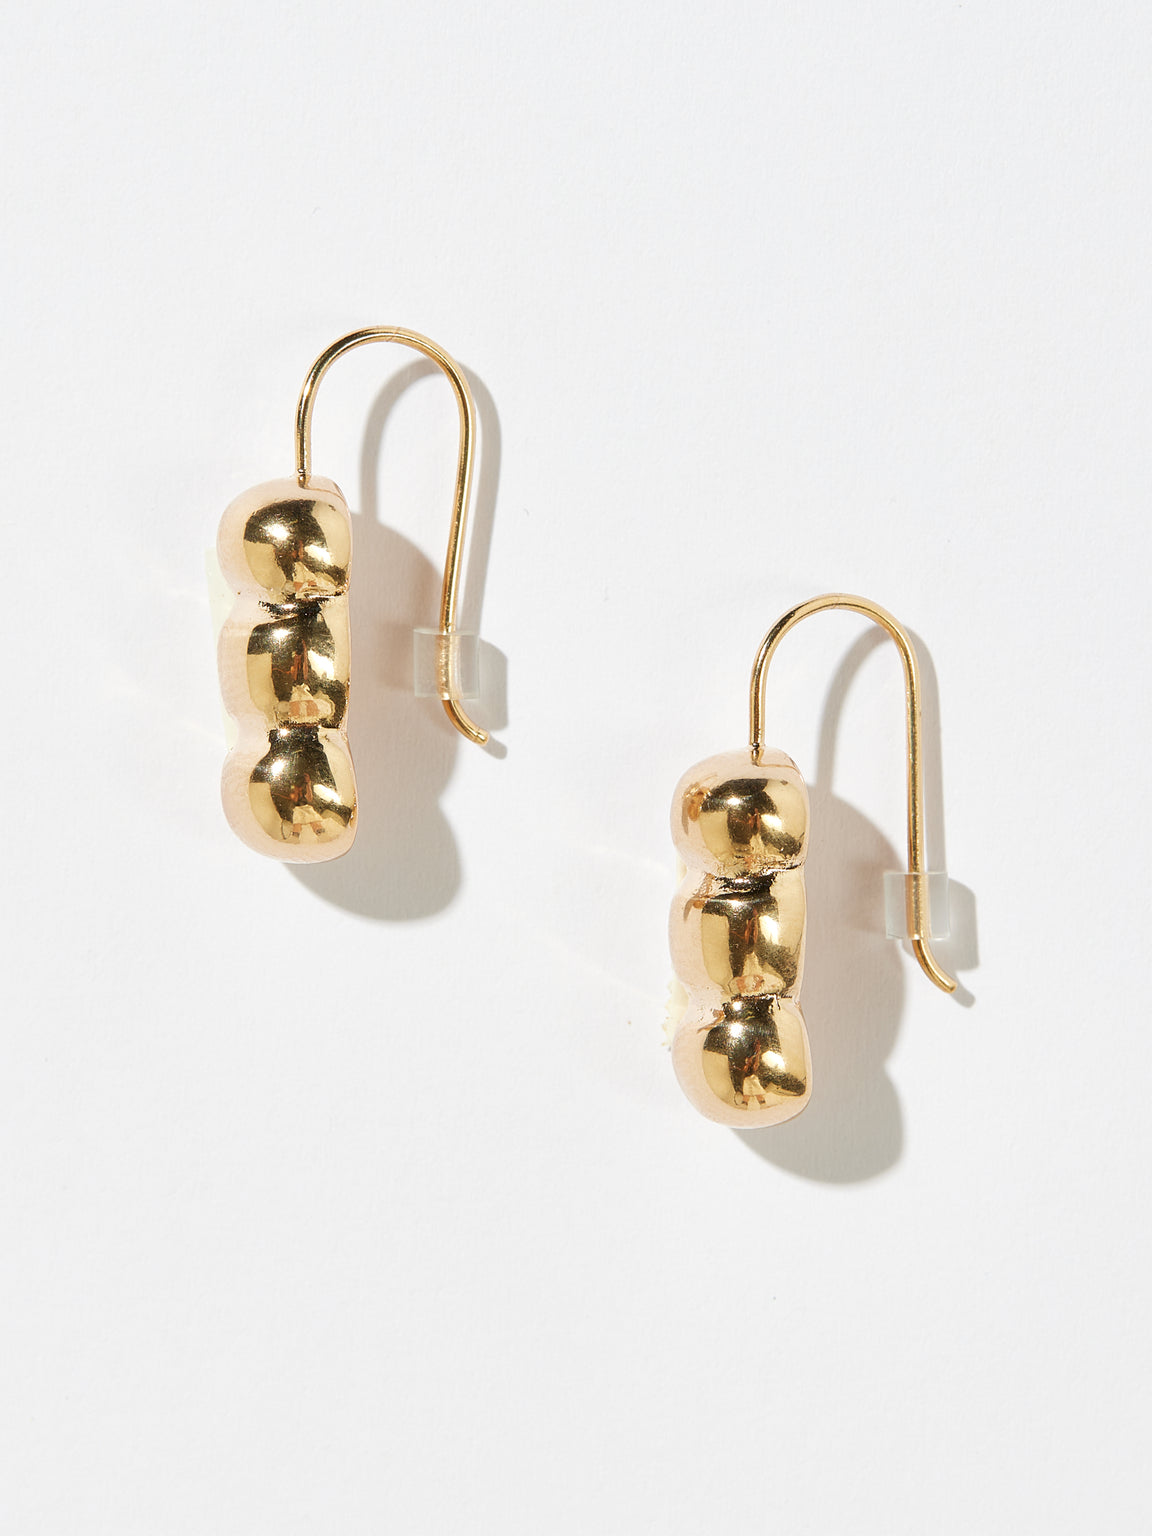 HELENA ROHNER | SHORT & CURVY GOLD PLATED BRASS EARRINGS GOLD